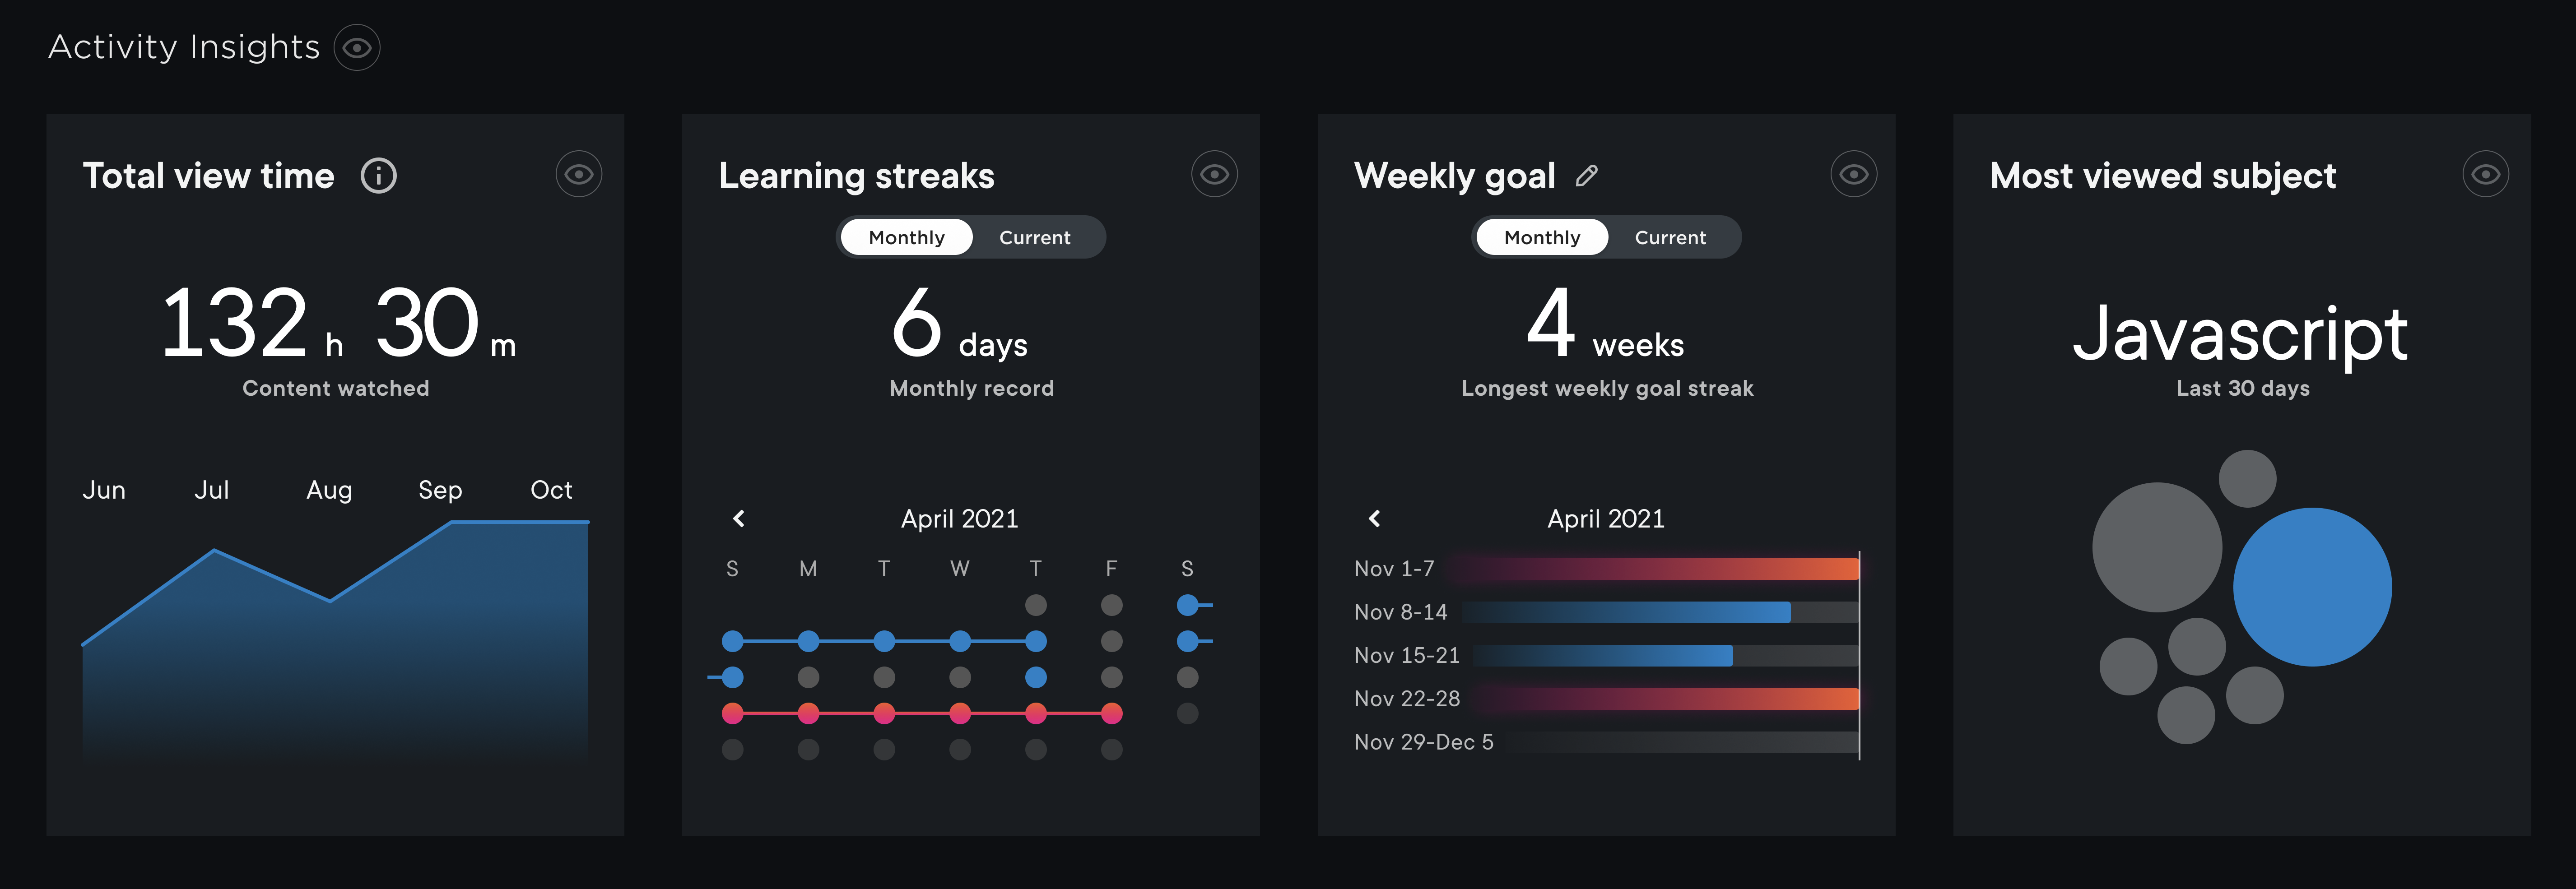 Screenshot of activity insights on the Profile page: Total view time, Learning streaks, Weekly goal, and most viewed subject.